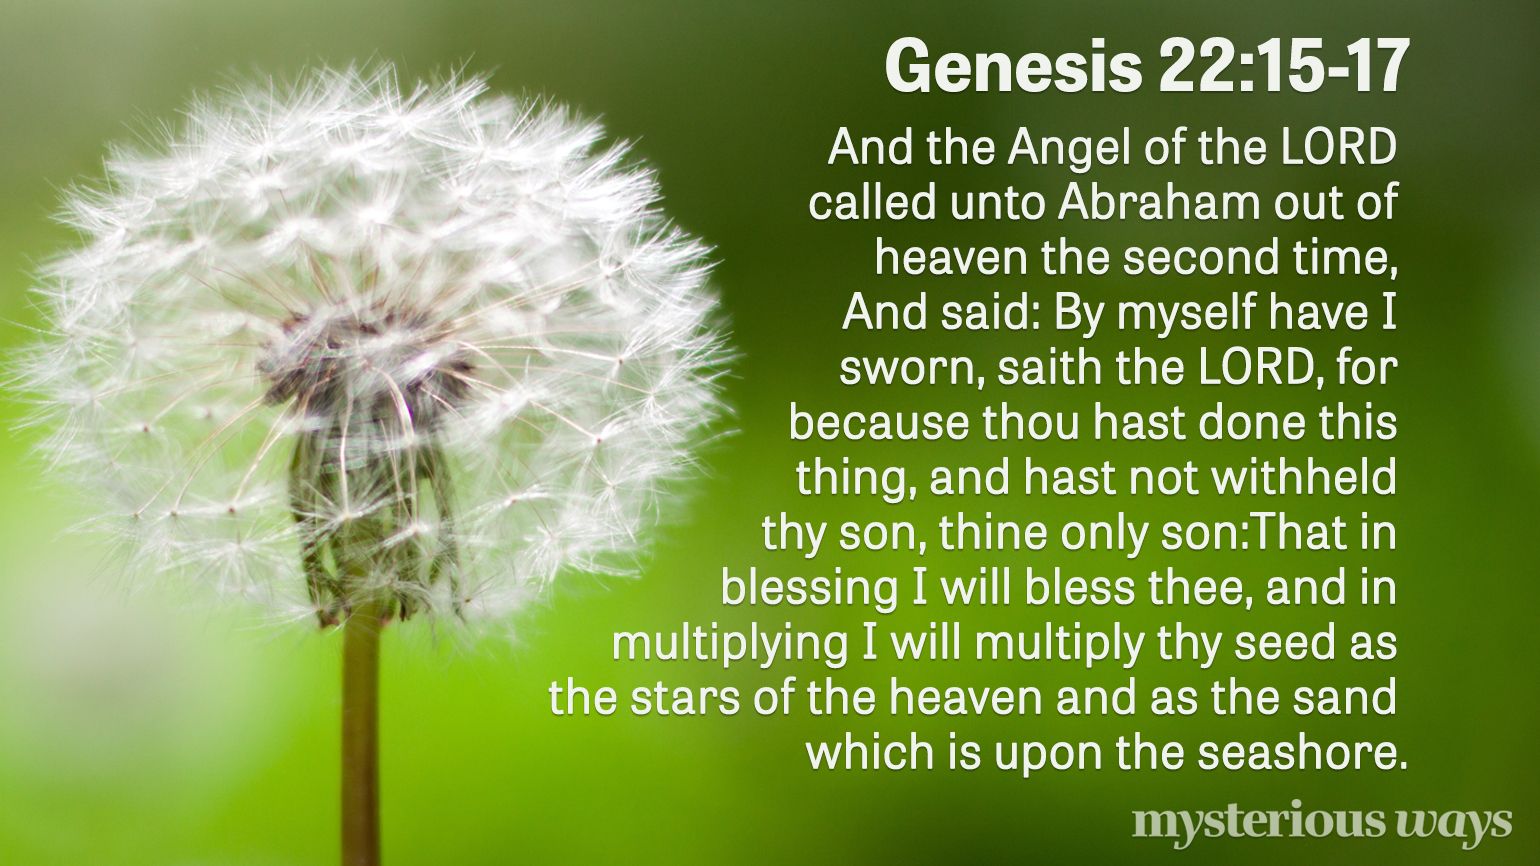 Genesis 22:15-17 “Then the Angel of the LORD called to Abraham a second time out of heaven, and said: ‘By Myself I have sworn, says the LORD, because you have done this thing, and have not withheld your son, your only son— blessing I will bless you, and multiplying I will multiply your descendants as the stars of the heaven and as the sand which is on the seashore’”